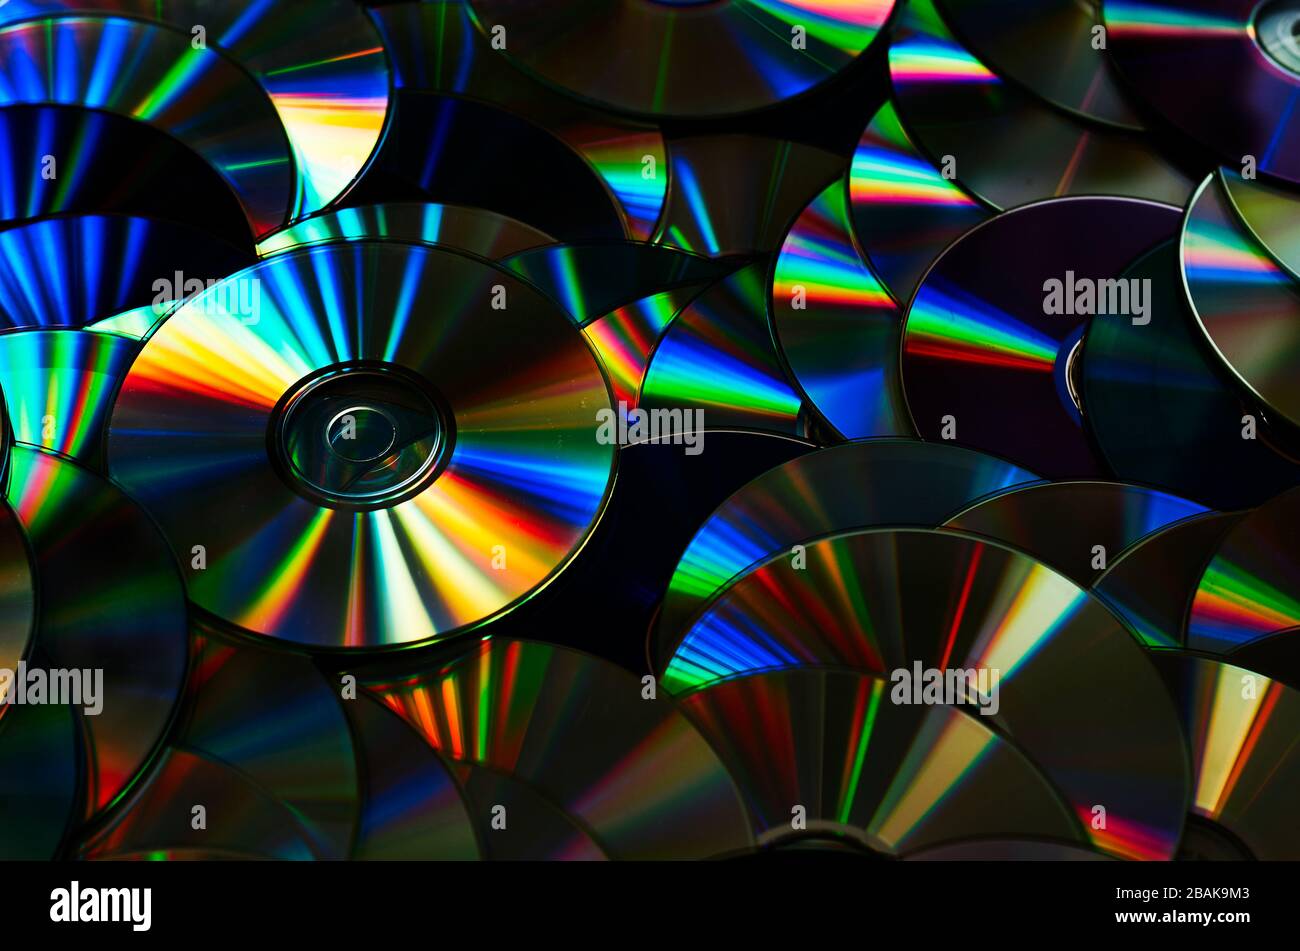 Group of old CD DVD compact optical disk storage medium with dust and scratches. Rainbow spectrum of iridescent colors Stock Photo